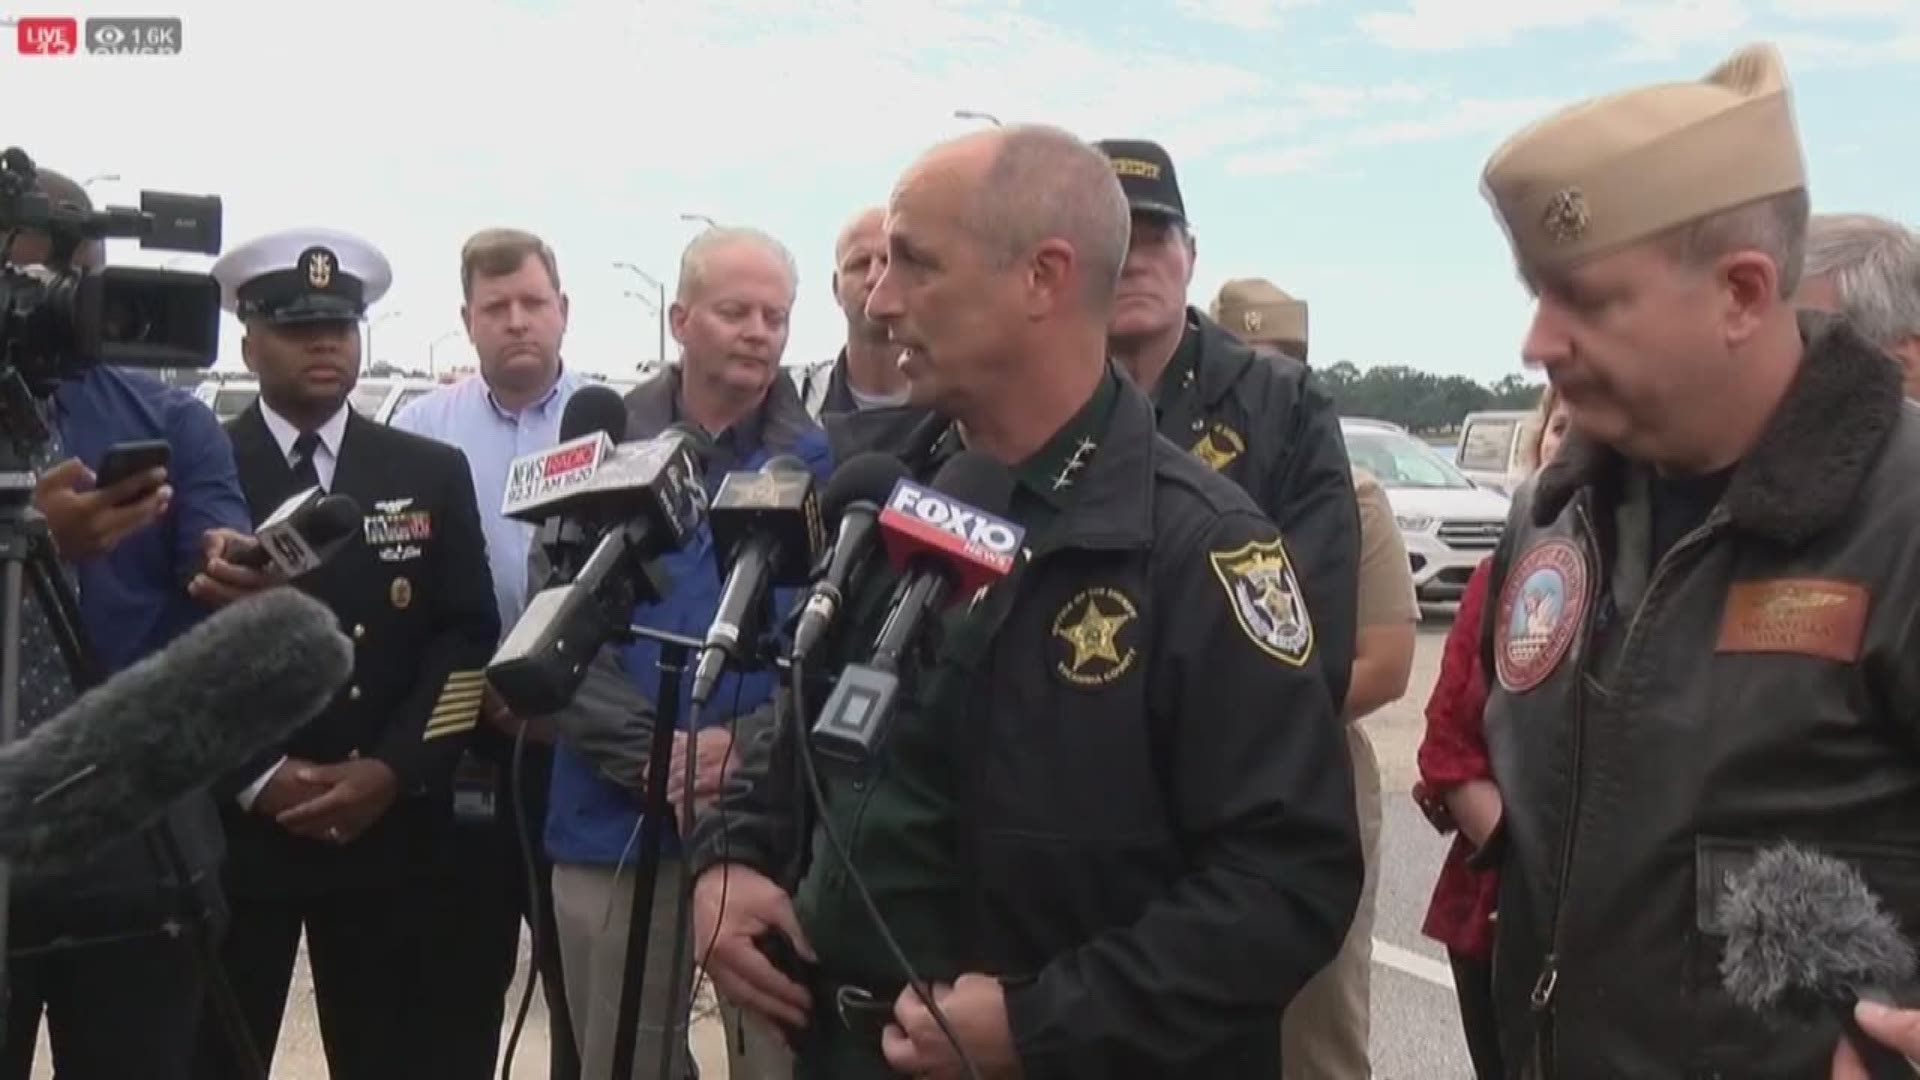 Four people are dead, including the gunman, after a shooting at Naval Air Station Pensacola.